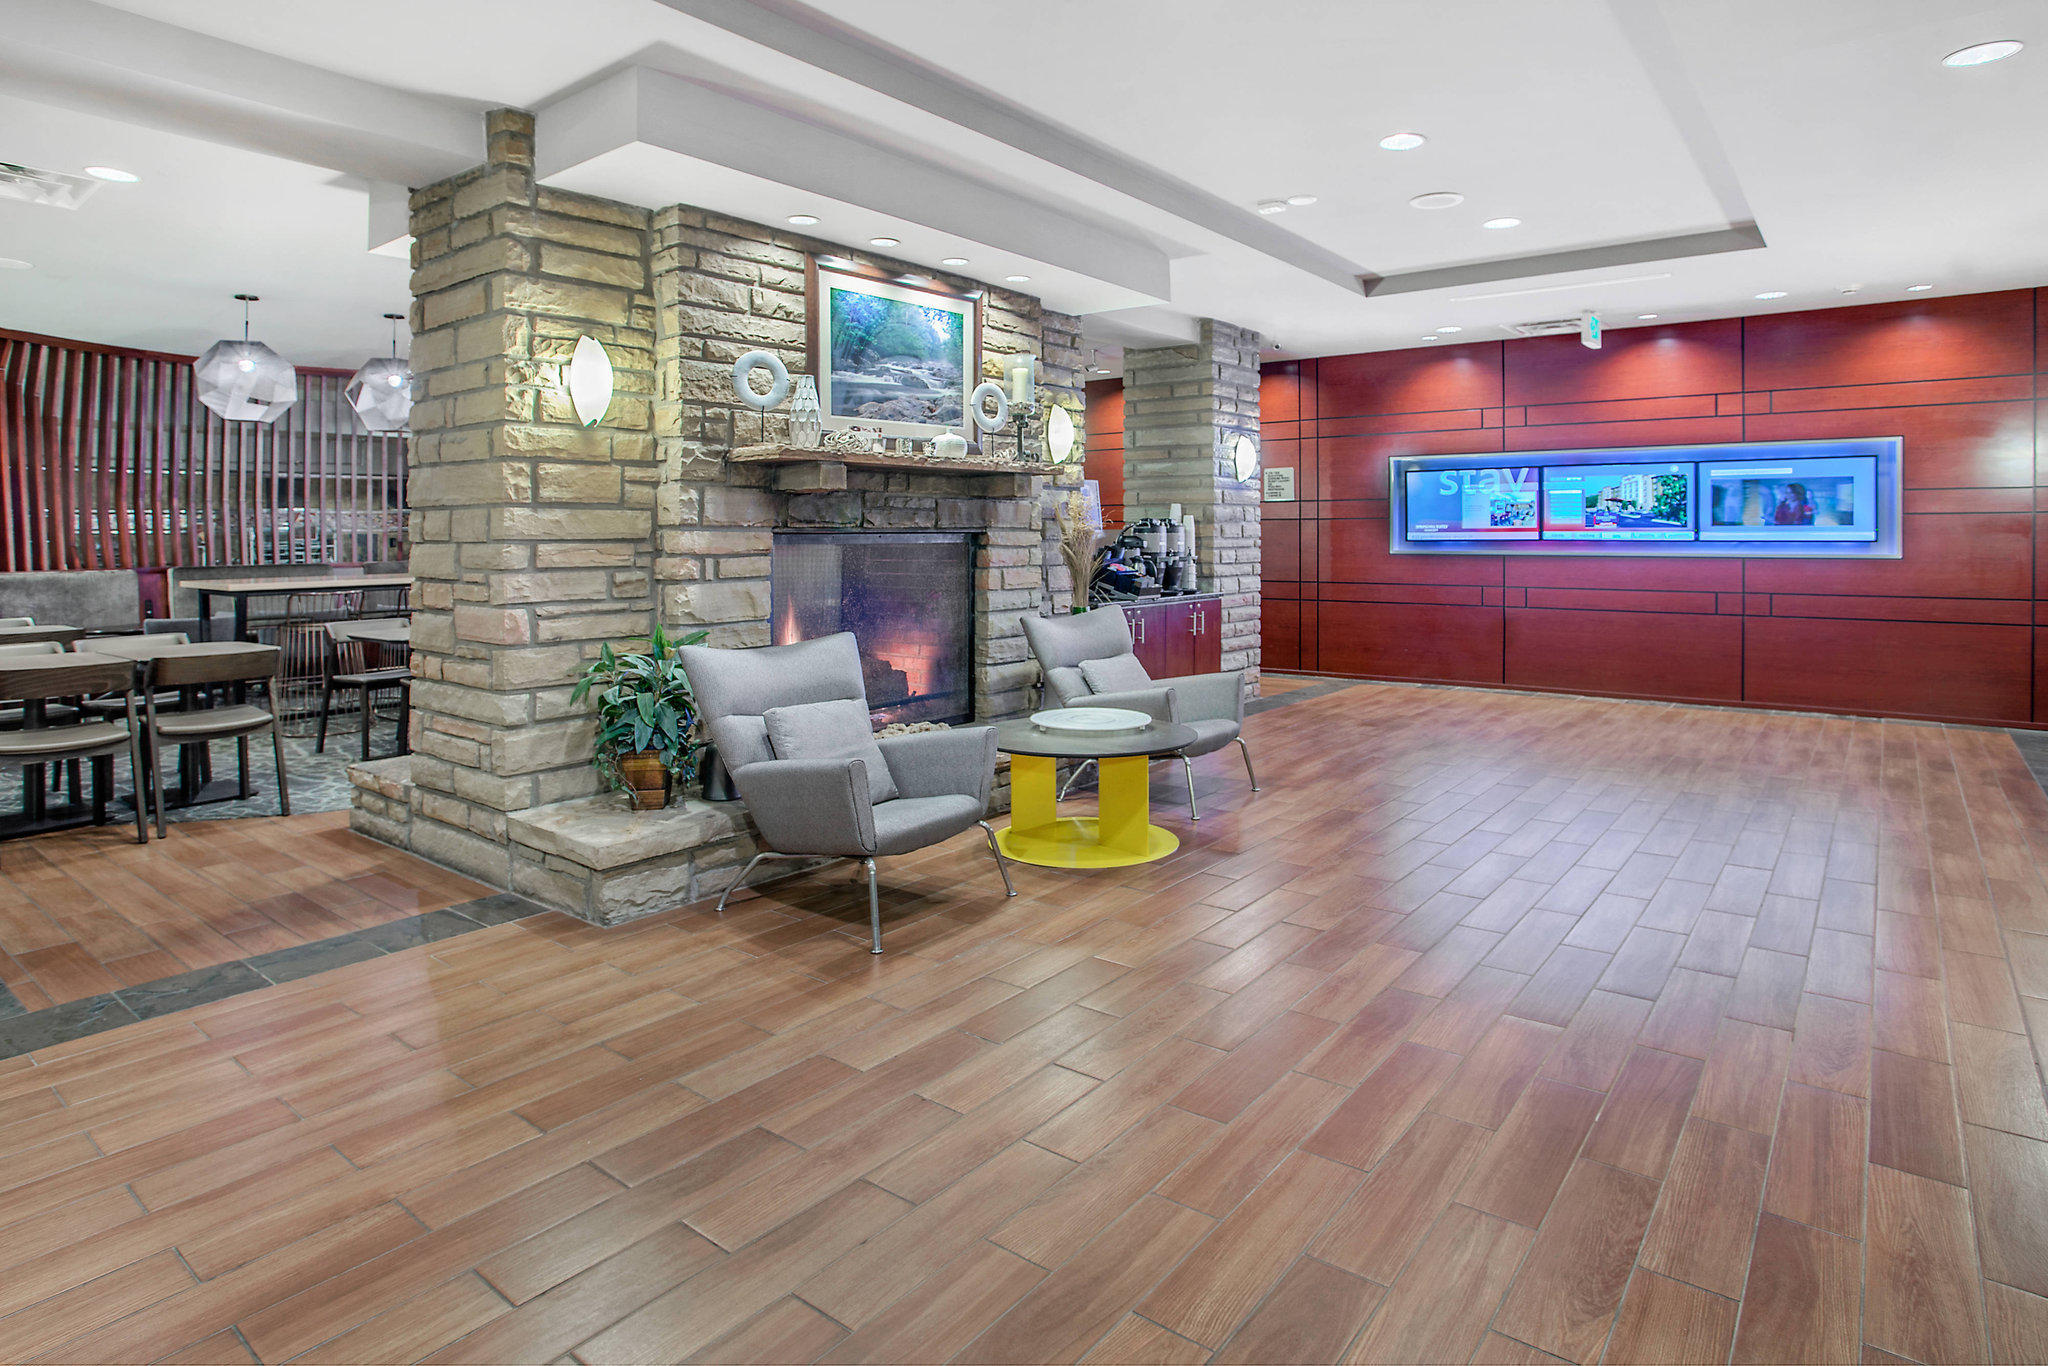 SpringHill Suites by Marriott Pigeon Forge Photo